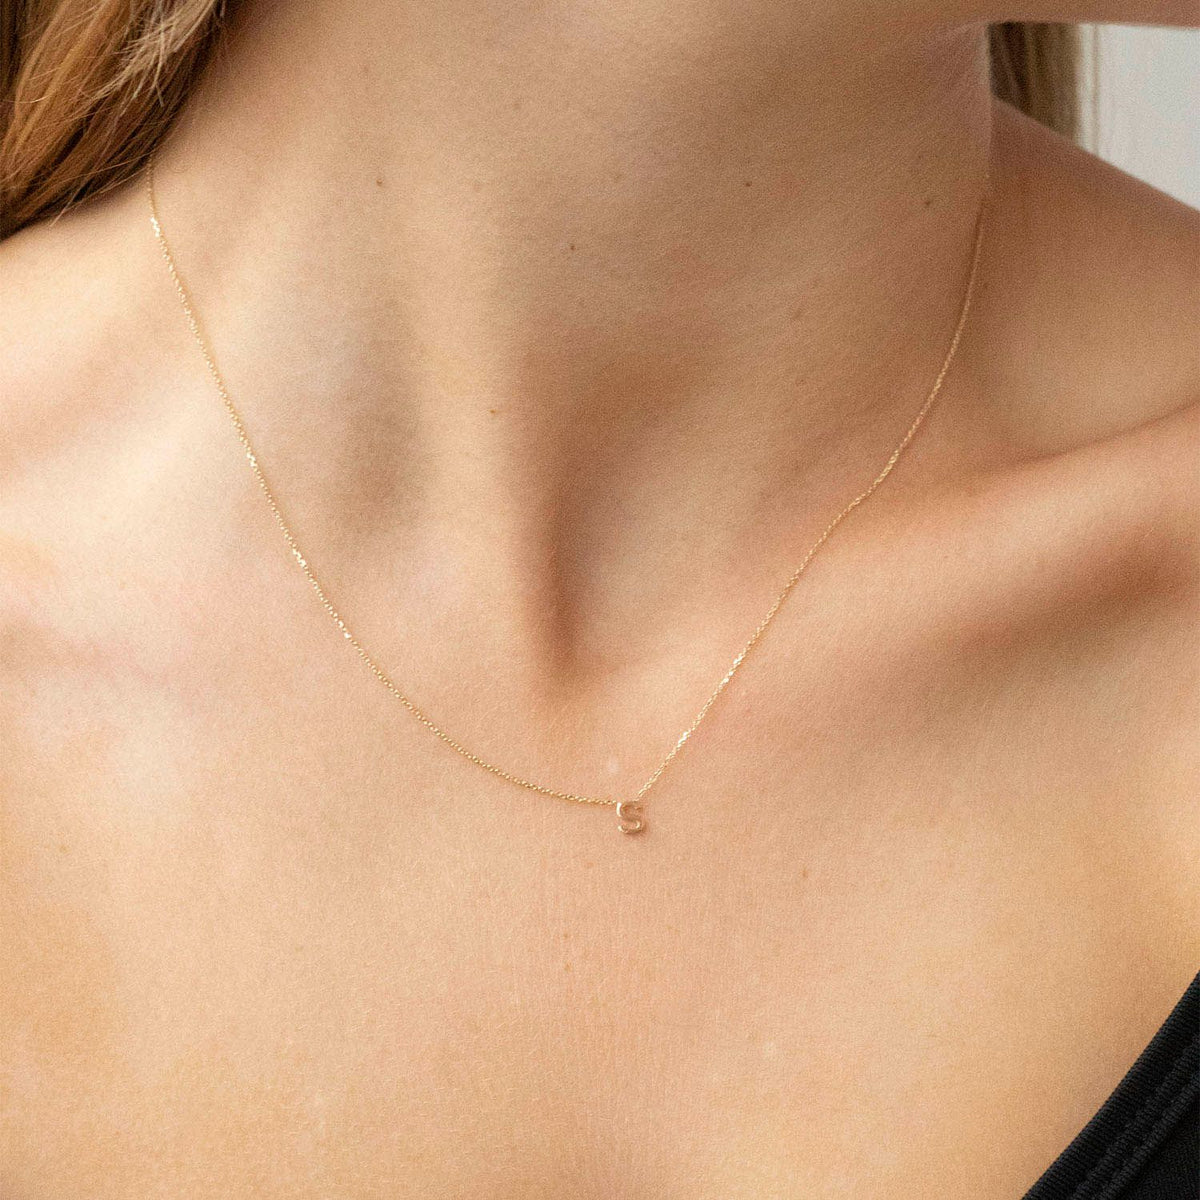 PETITE 'S' INITIAL NECKLACE | 9K SOLID GOLD